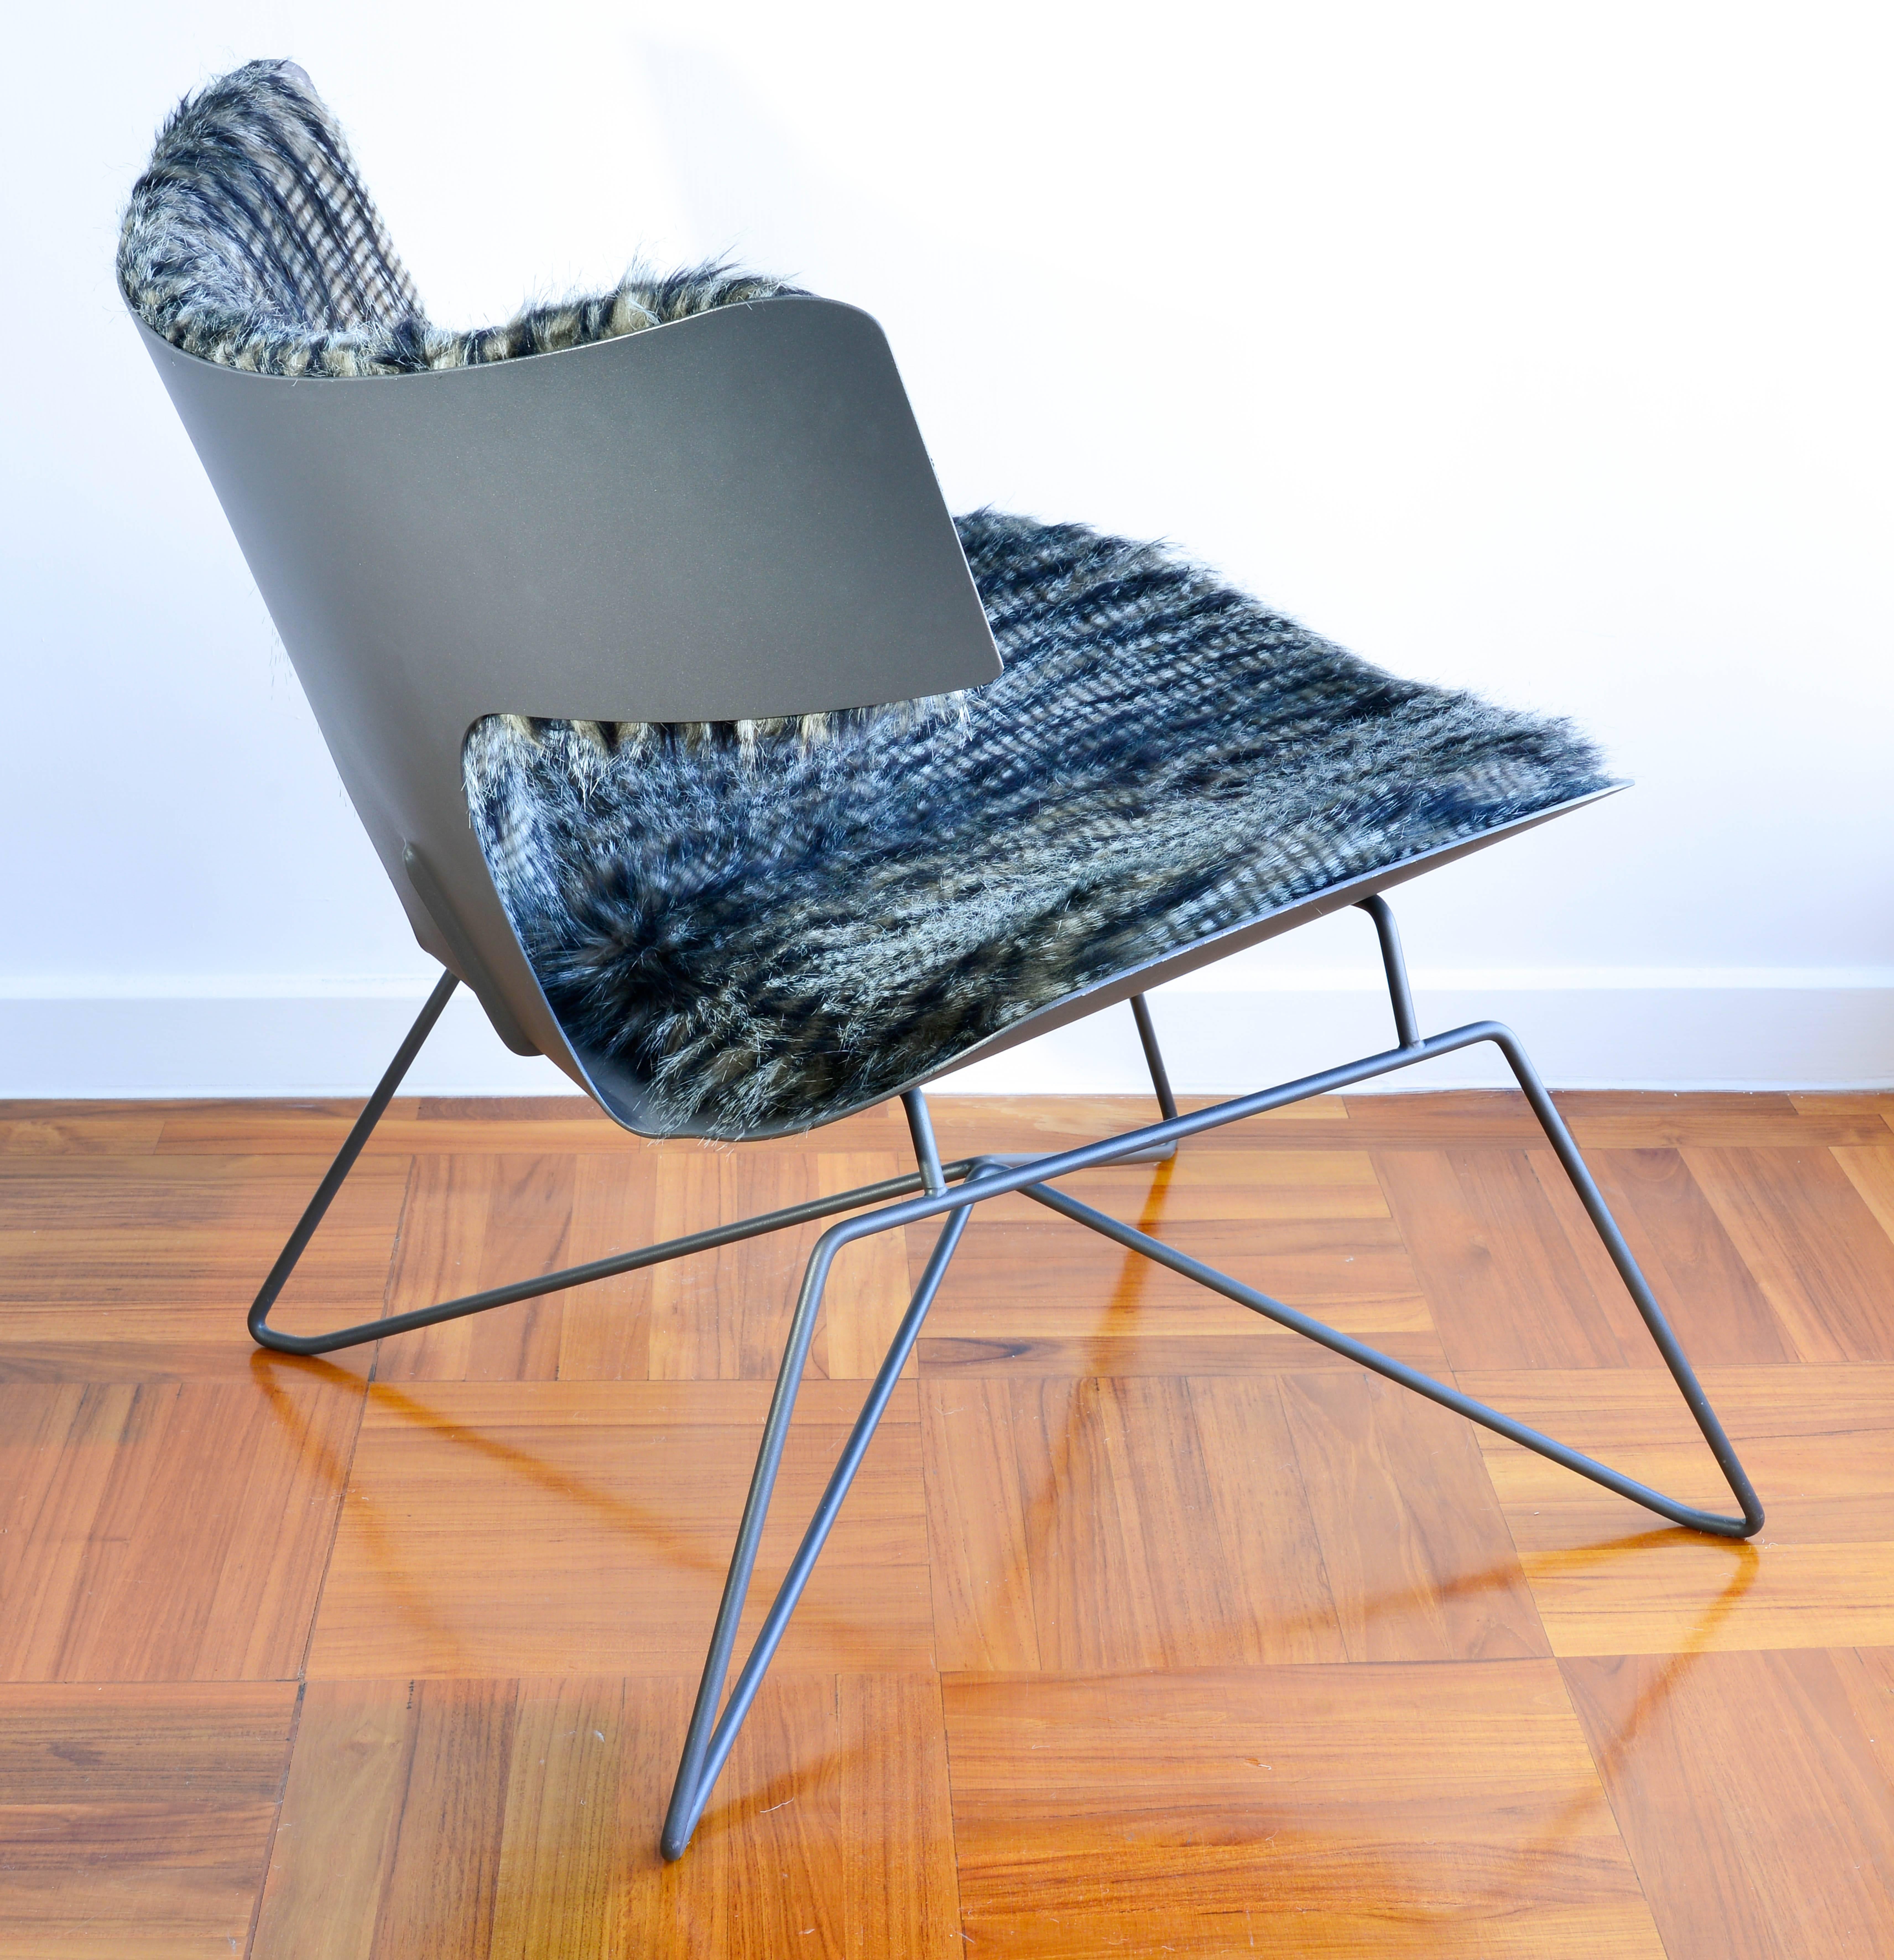 Powder-Coated Powder Coated and Faux Fur Industrial-style Lounge Chair from France